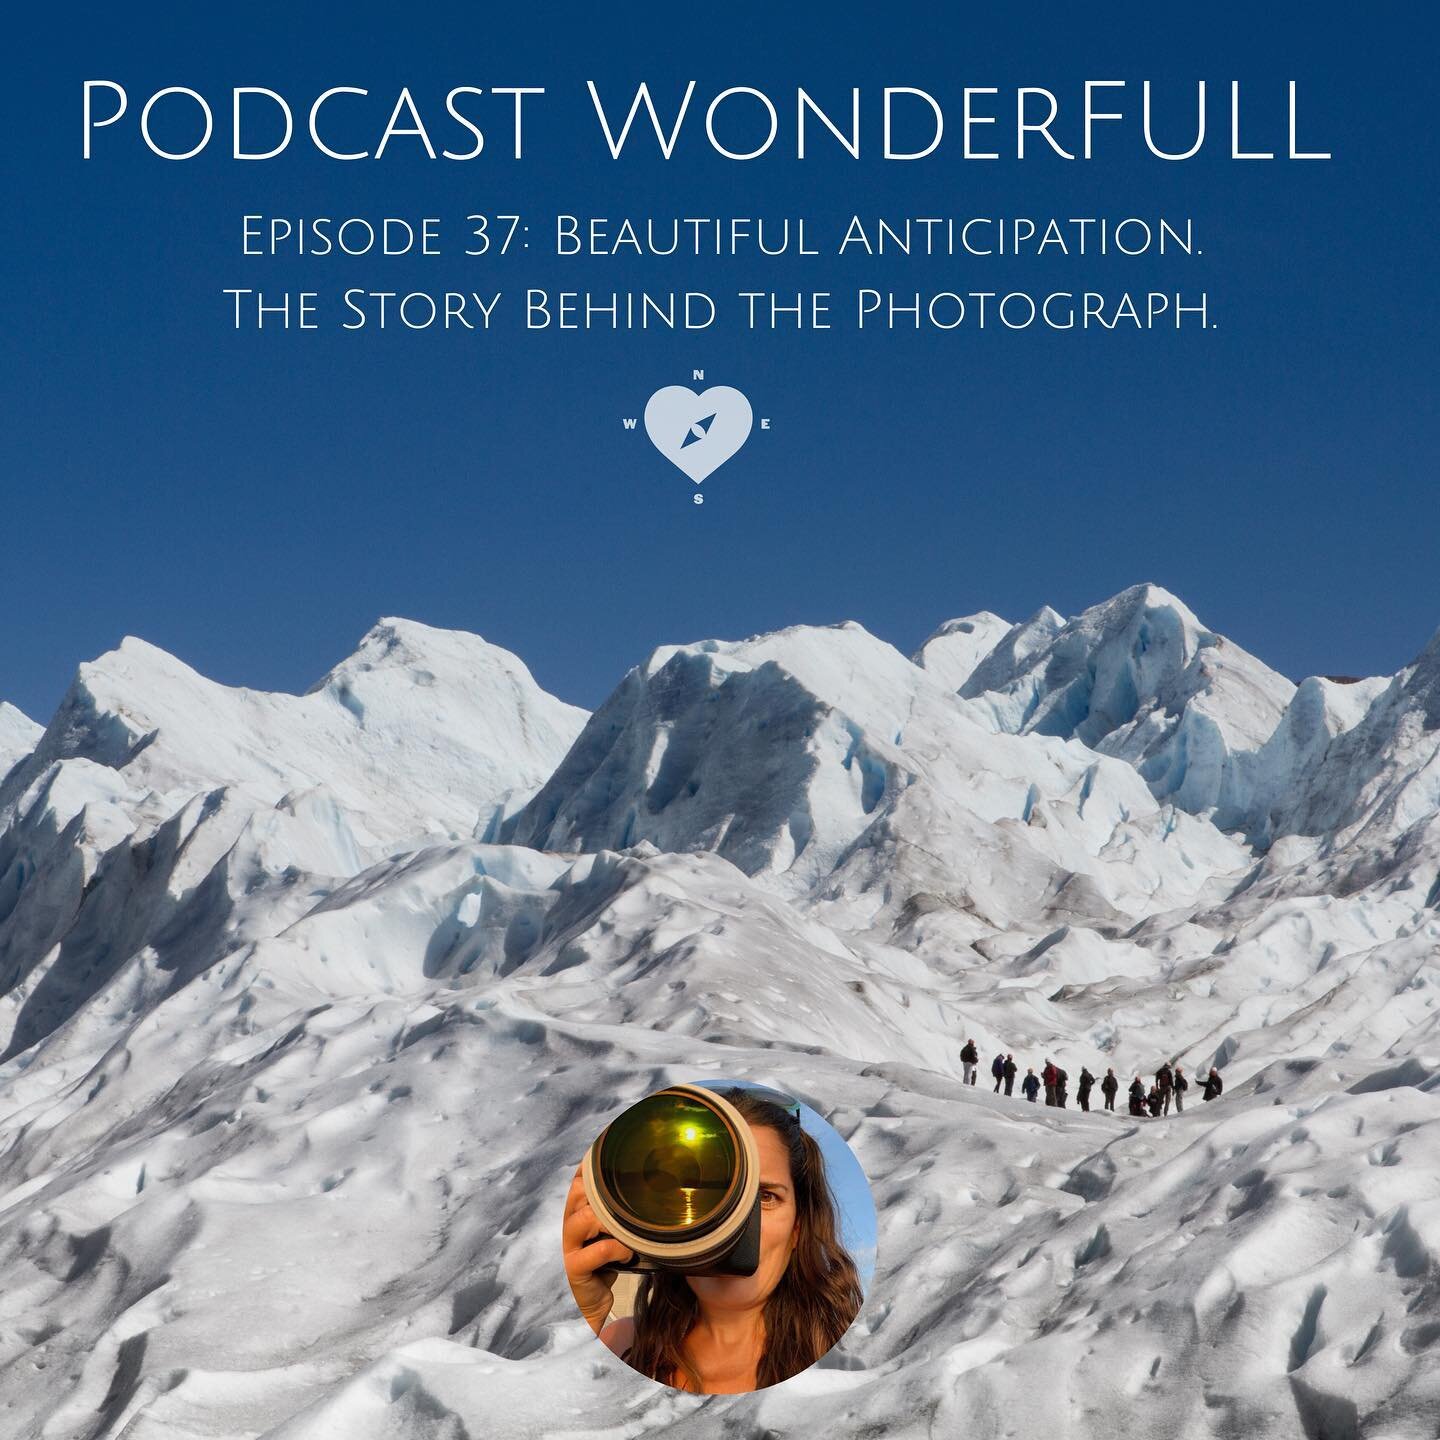 This week&rsquo;s episode covers the story behind a beautiful image I captured of while ice trekking the stunning Perito Moreno Glacier in Argentina. 

Come along with me as I share the story of watching the group before me trek up the glacier in ful